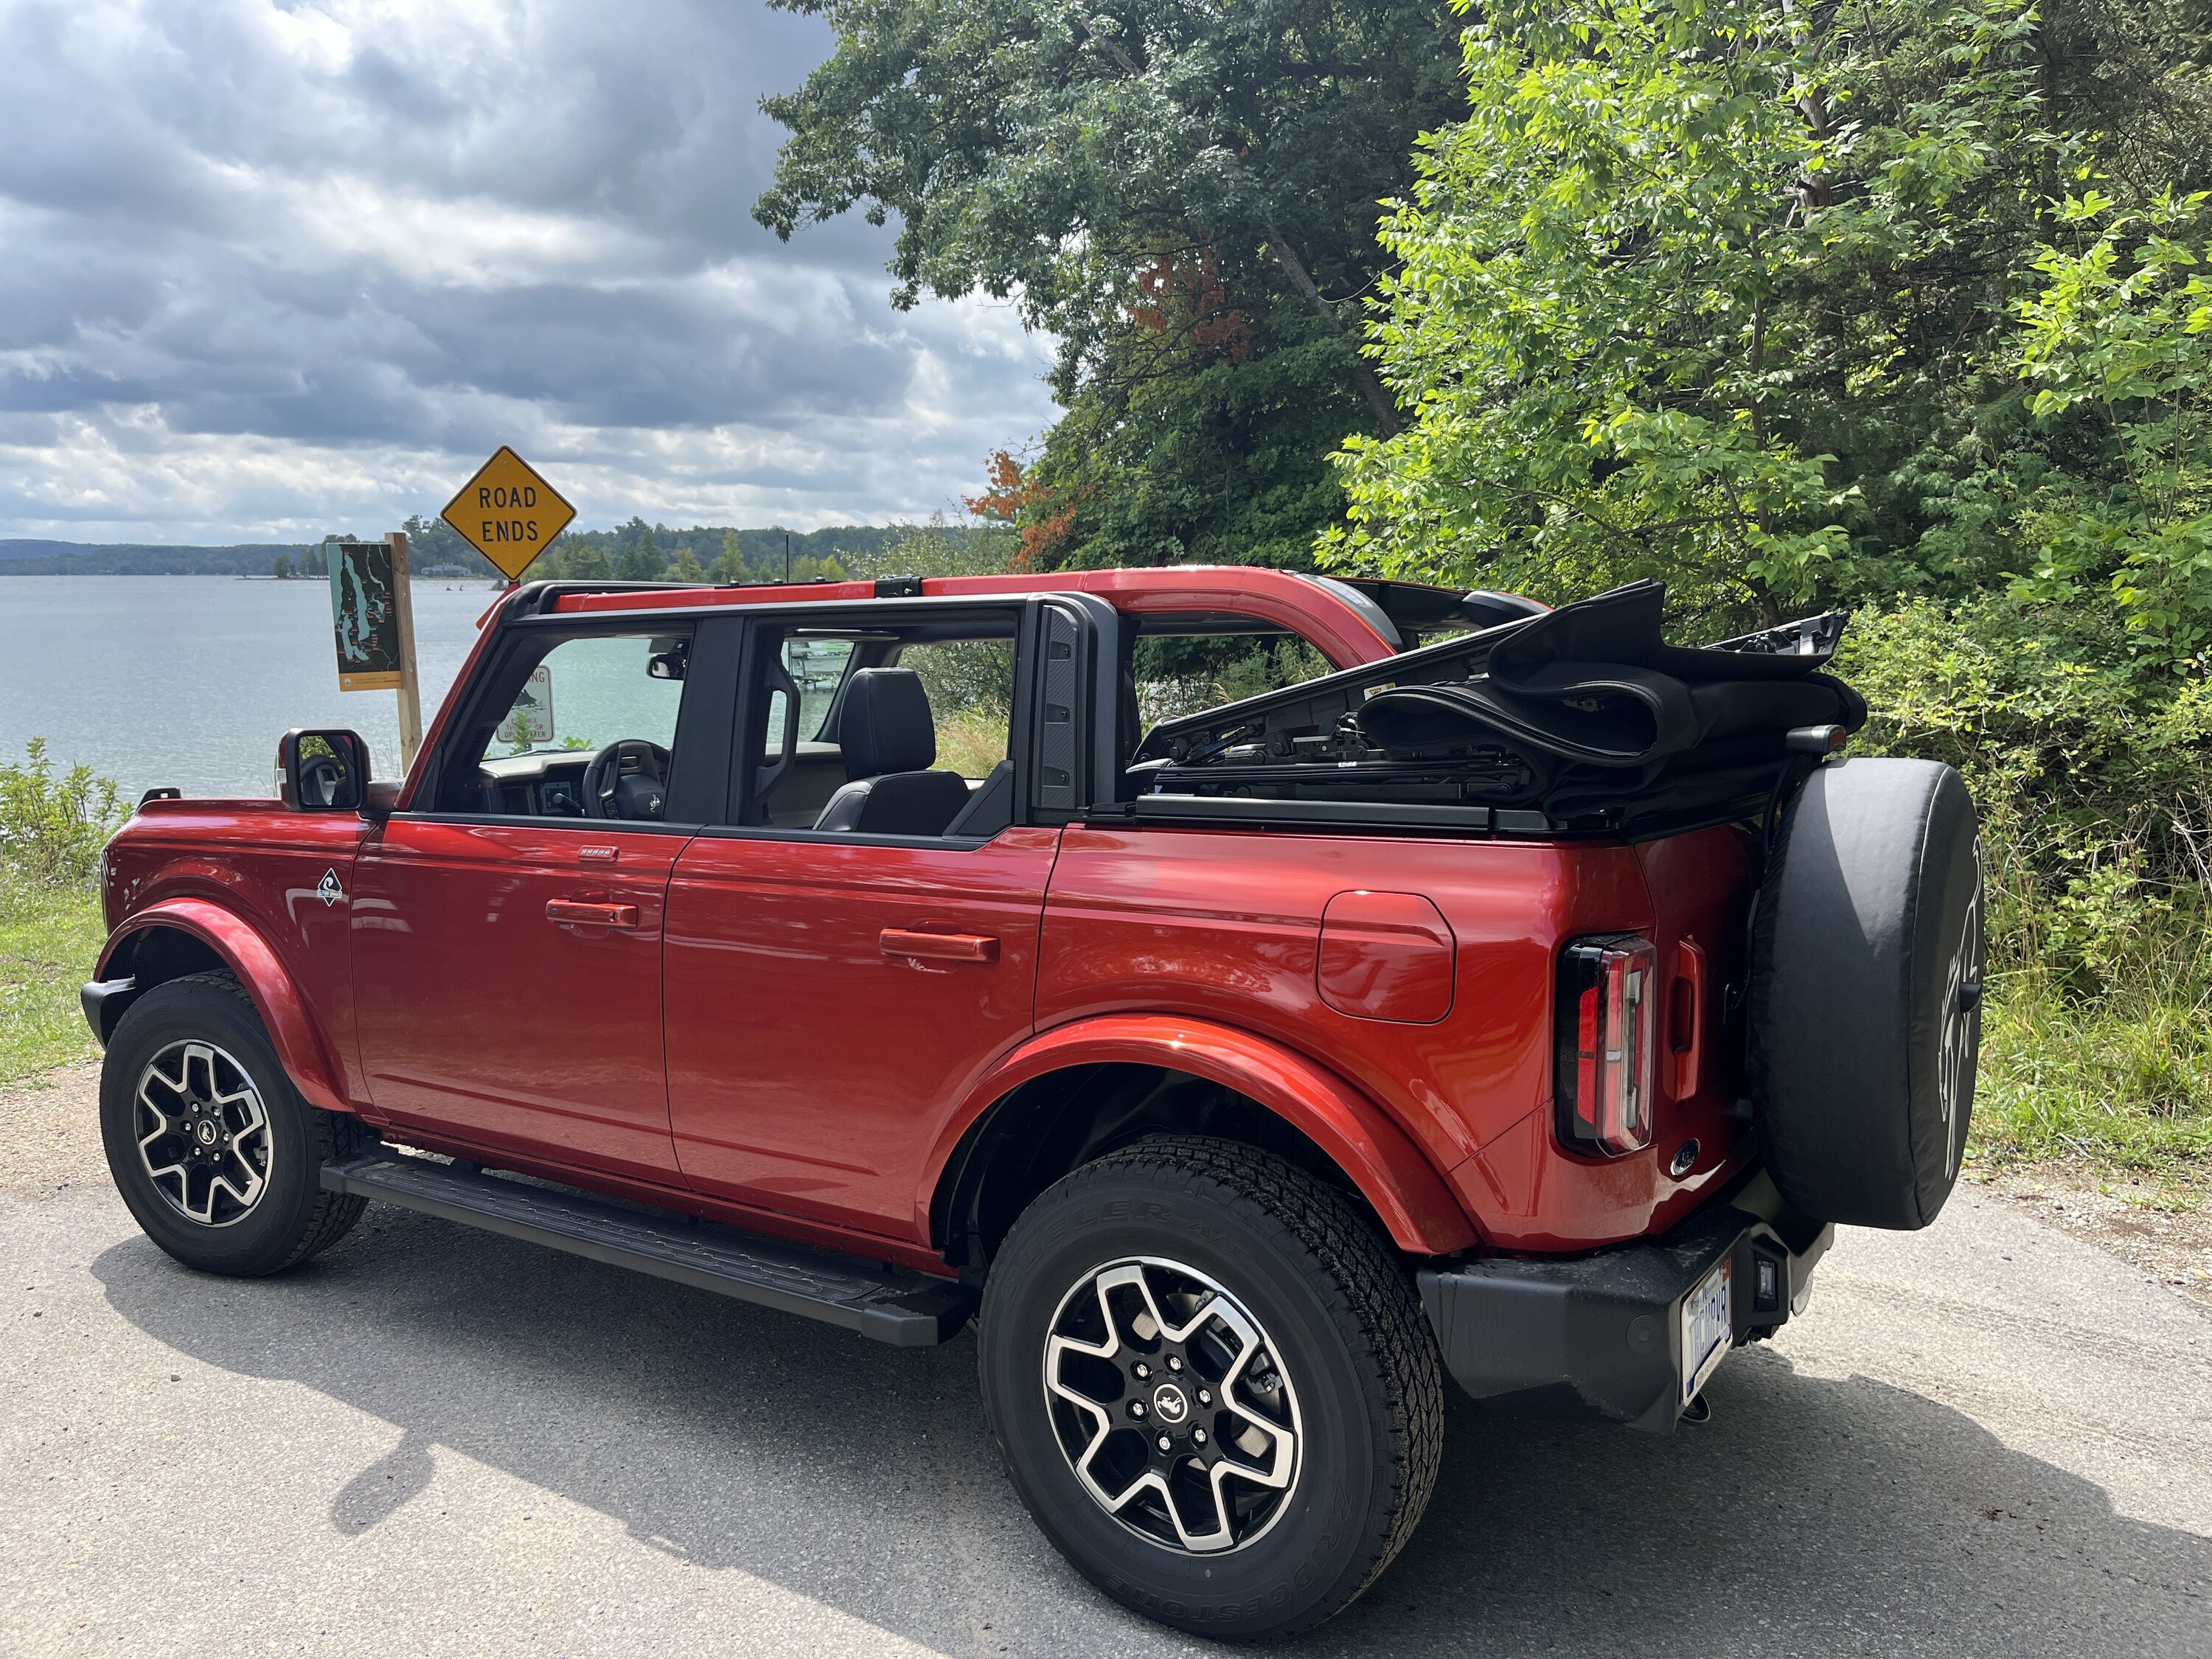 Ford Bronco Selling OEM soft top - updated post IMG_1804